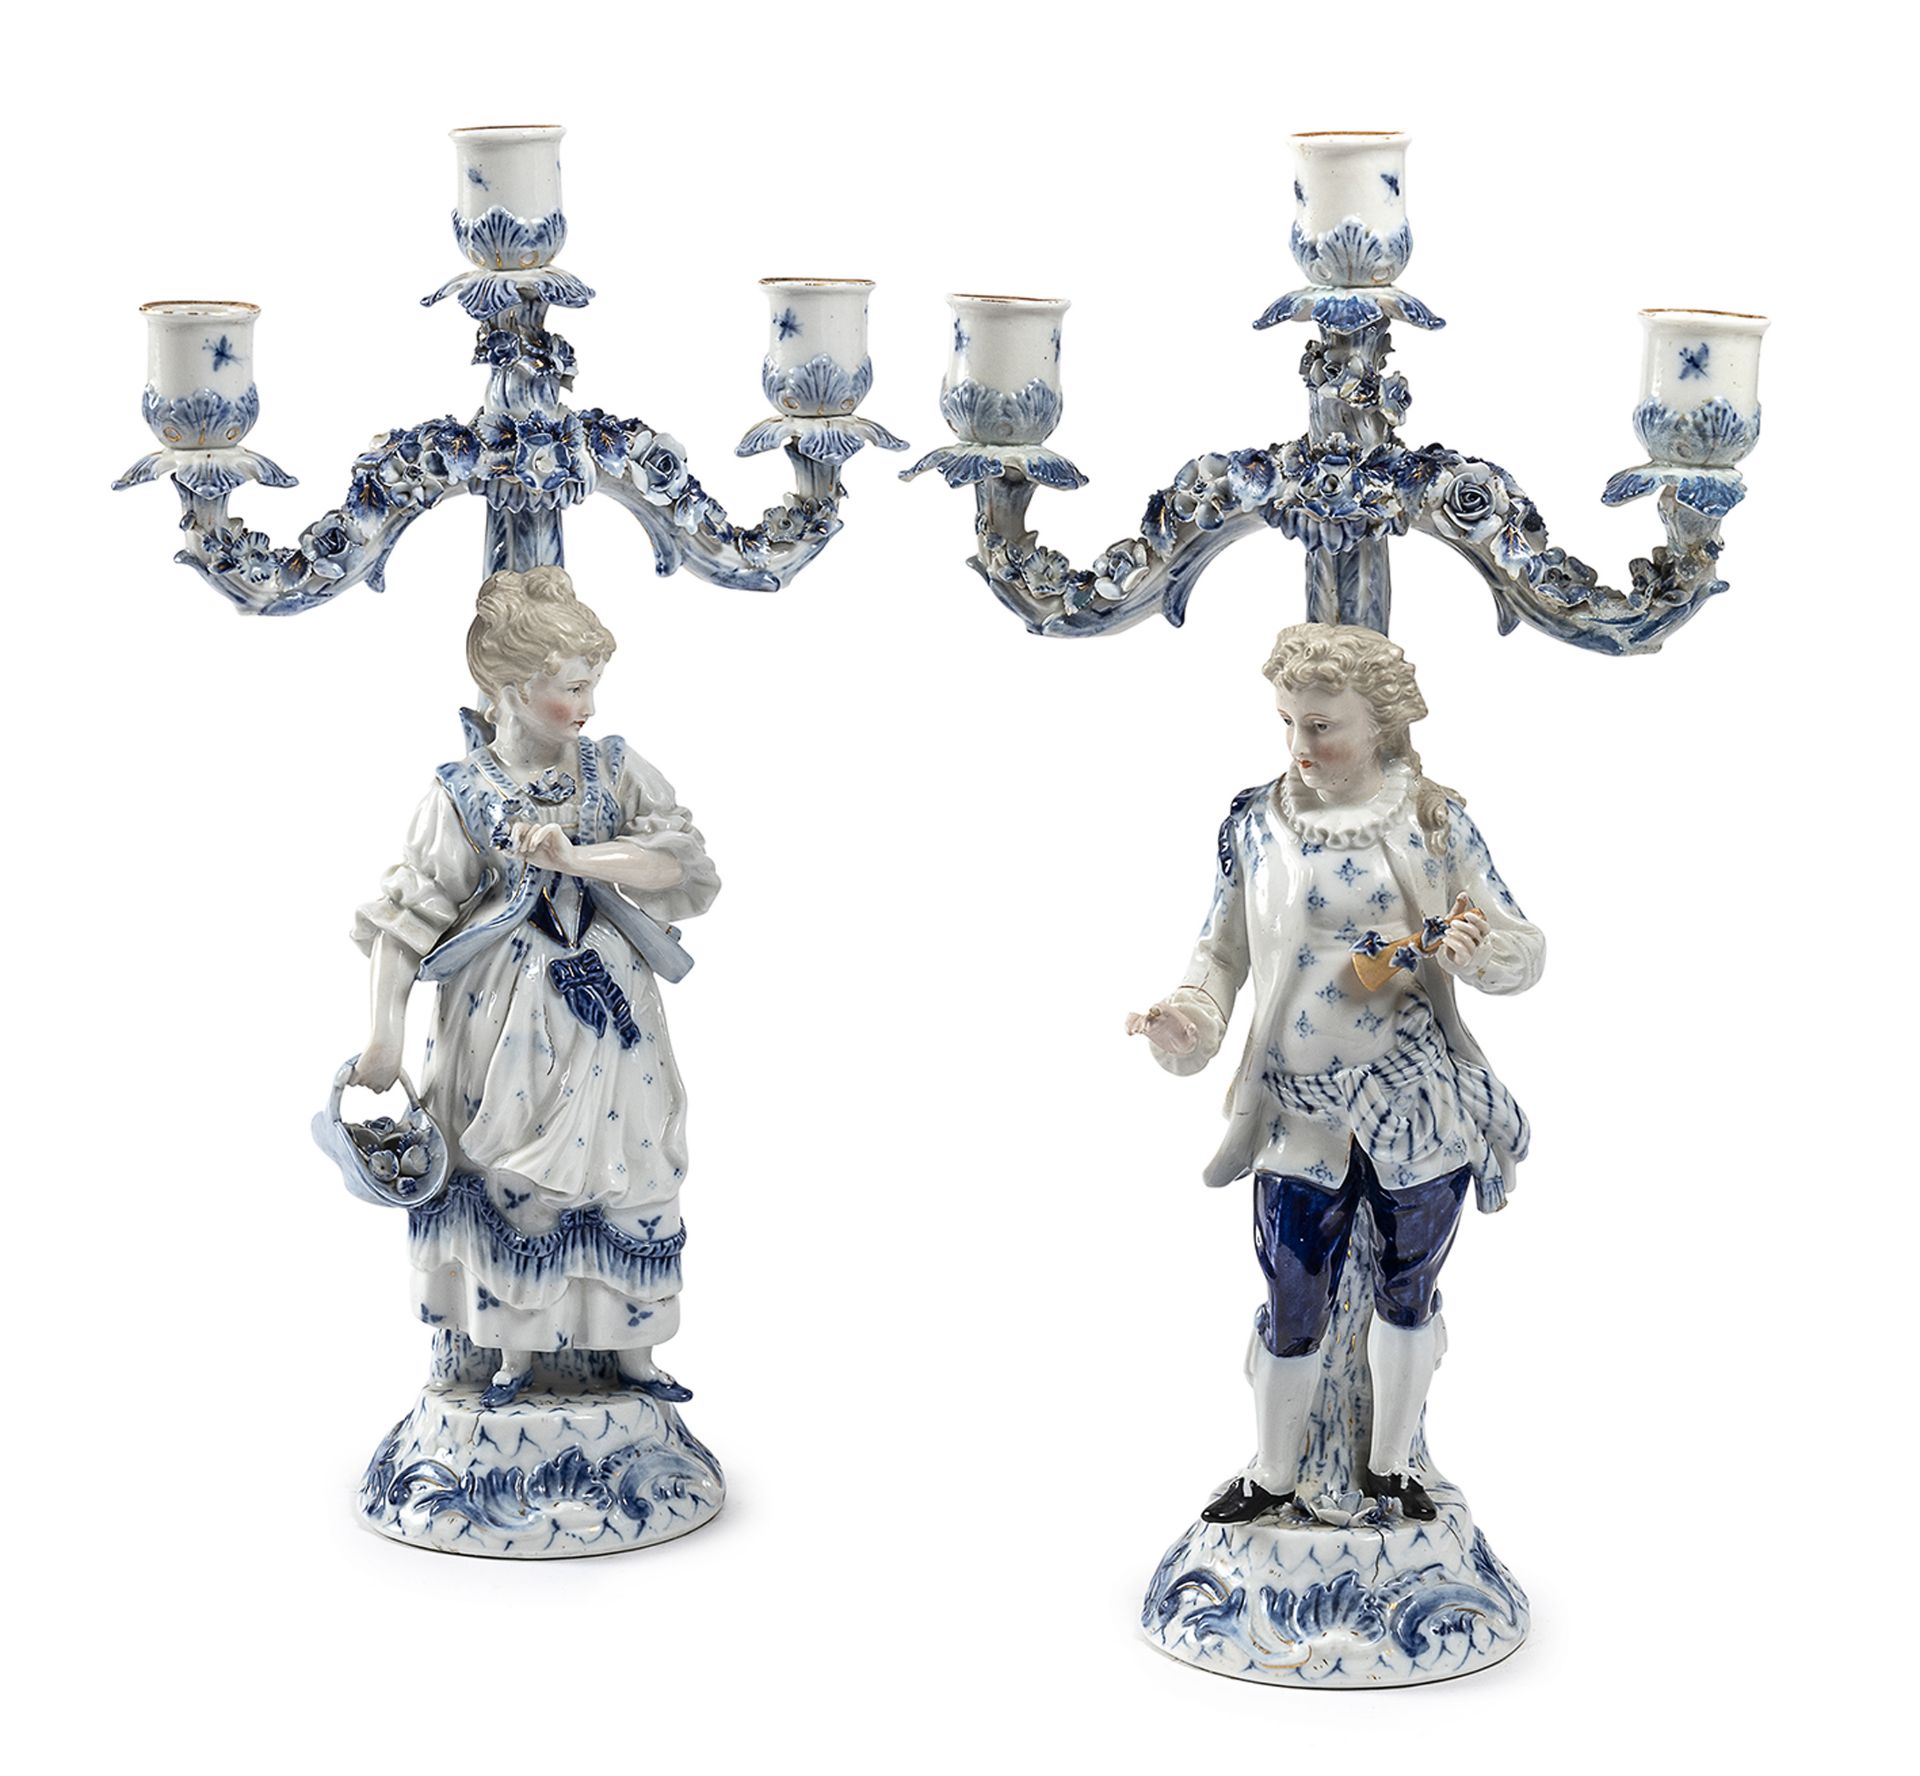 PAIR OF PORCELAIN CANDELABRA EARLY 20TH CENTURY